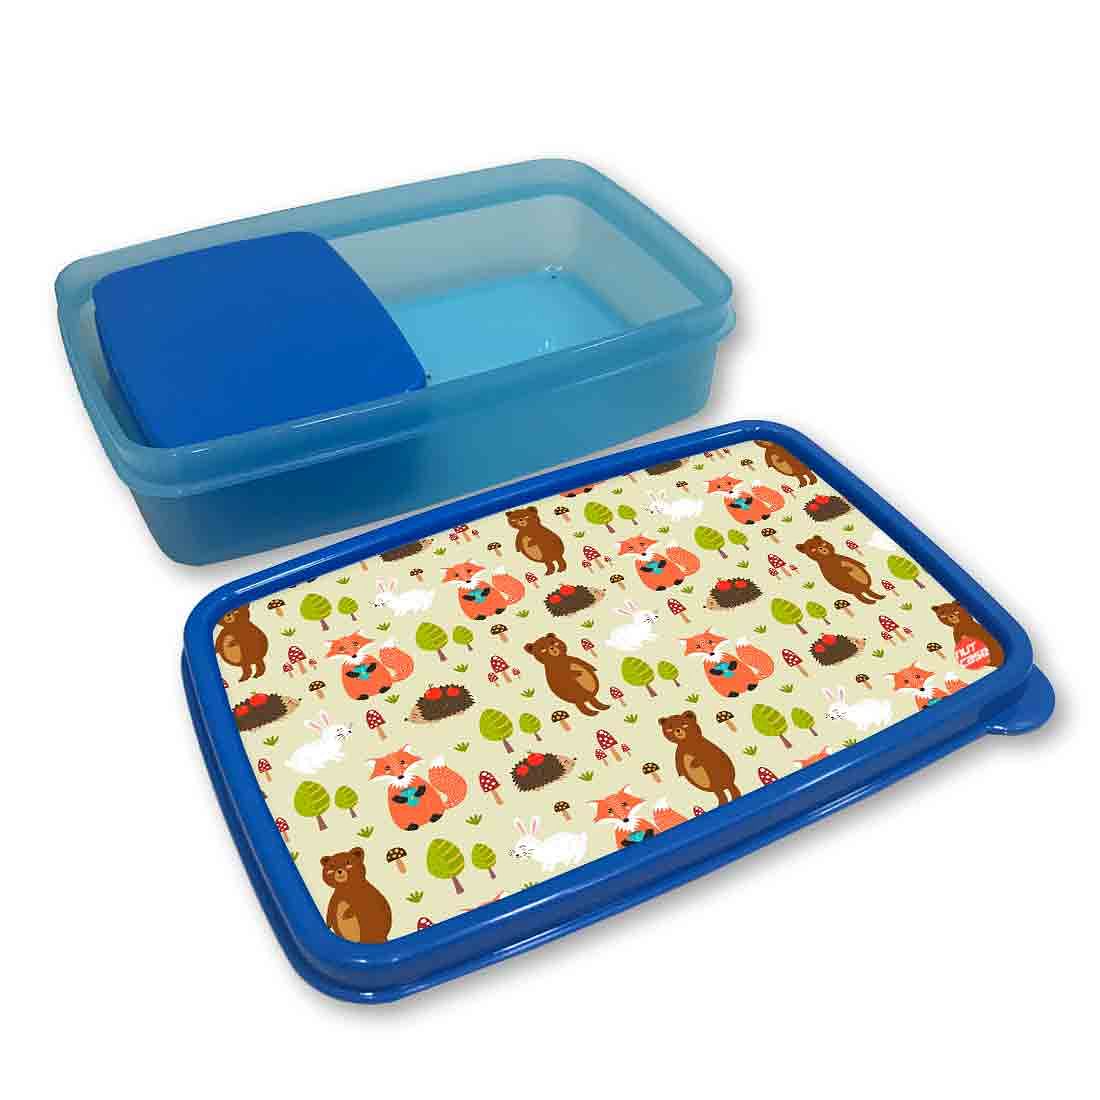 Snacks Biscuit Box for Kids School Lunch Box - Rabbit and Bear Nutcase